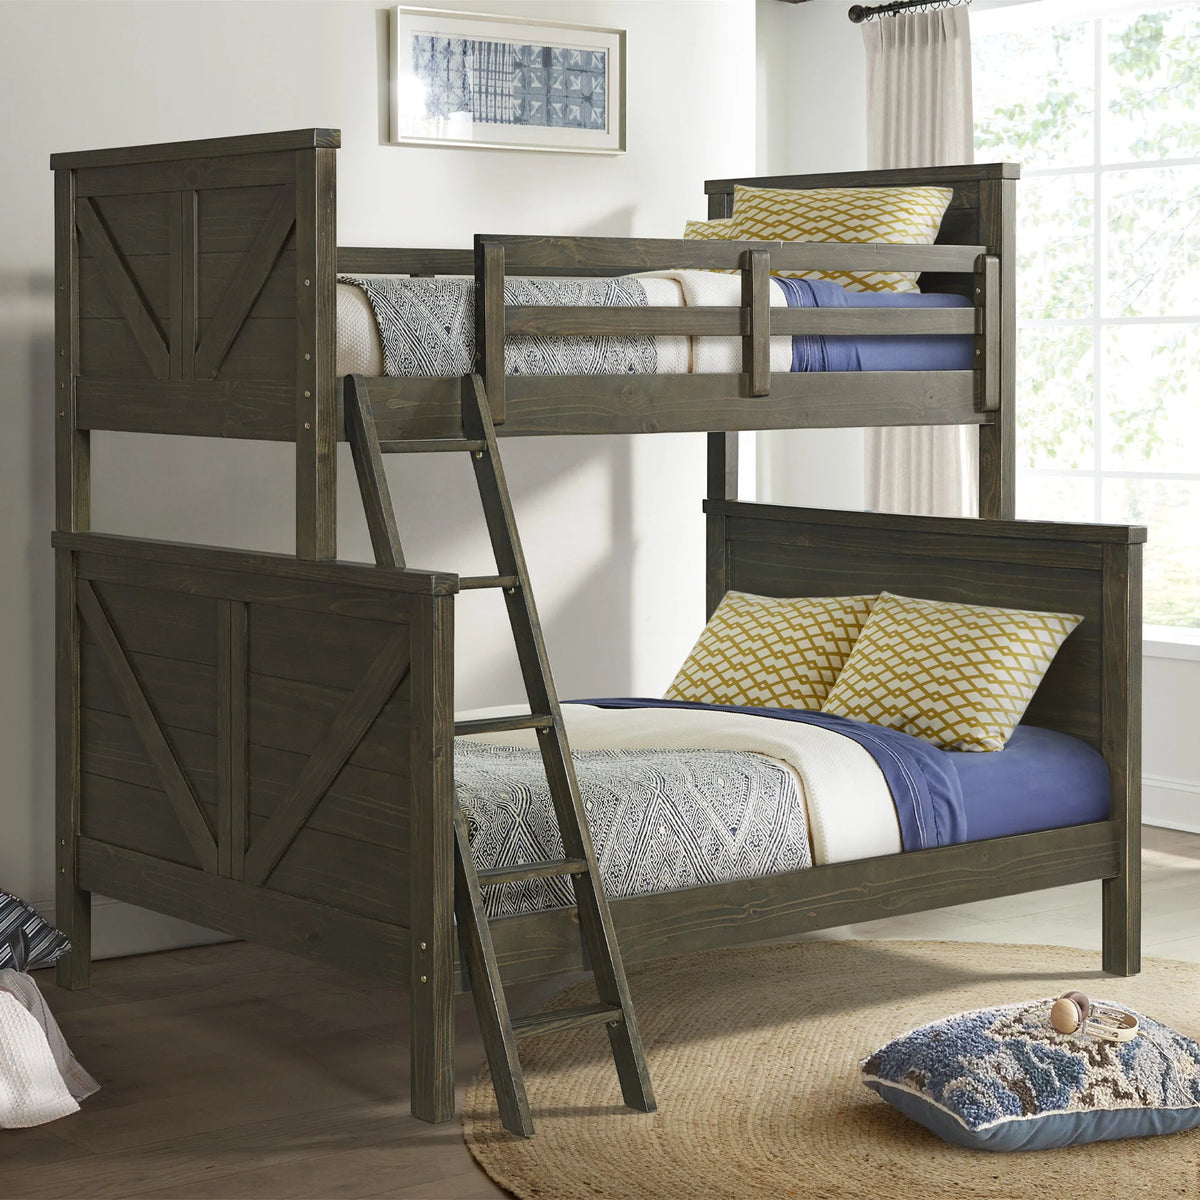 Tahoe Youth Bunk Bed (Twin/Full) River Rock